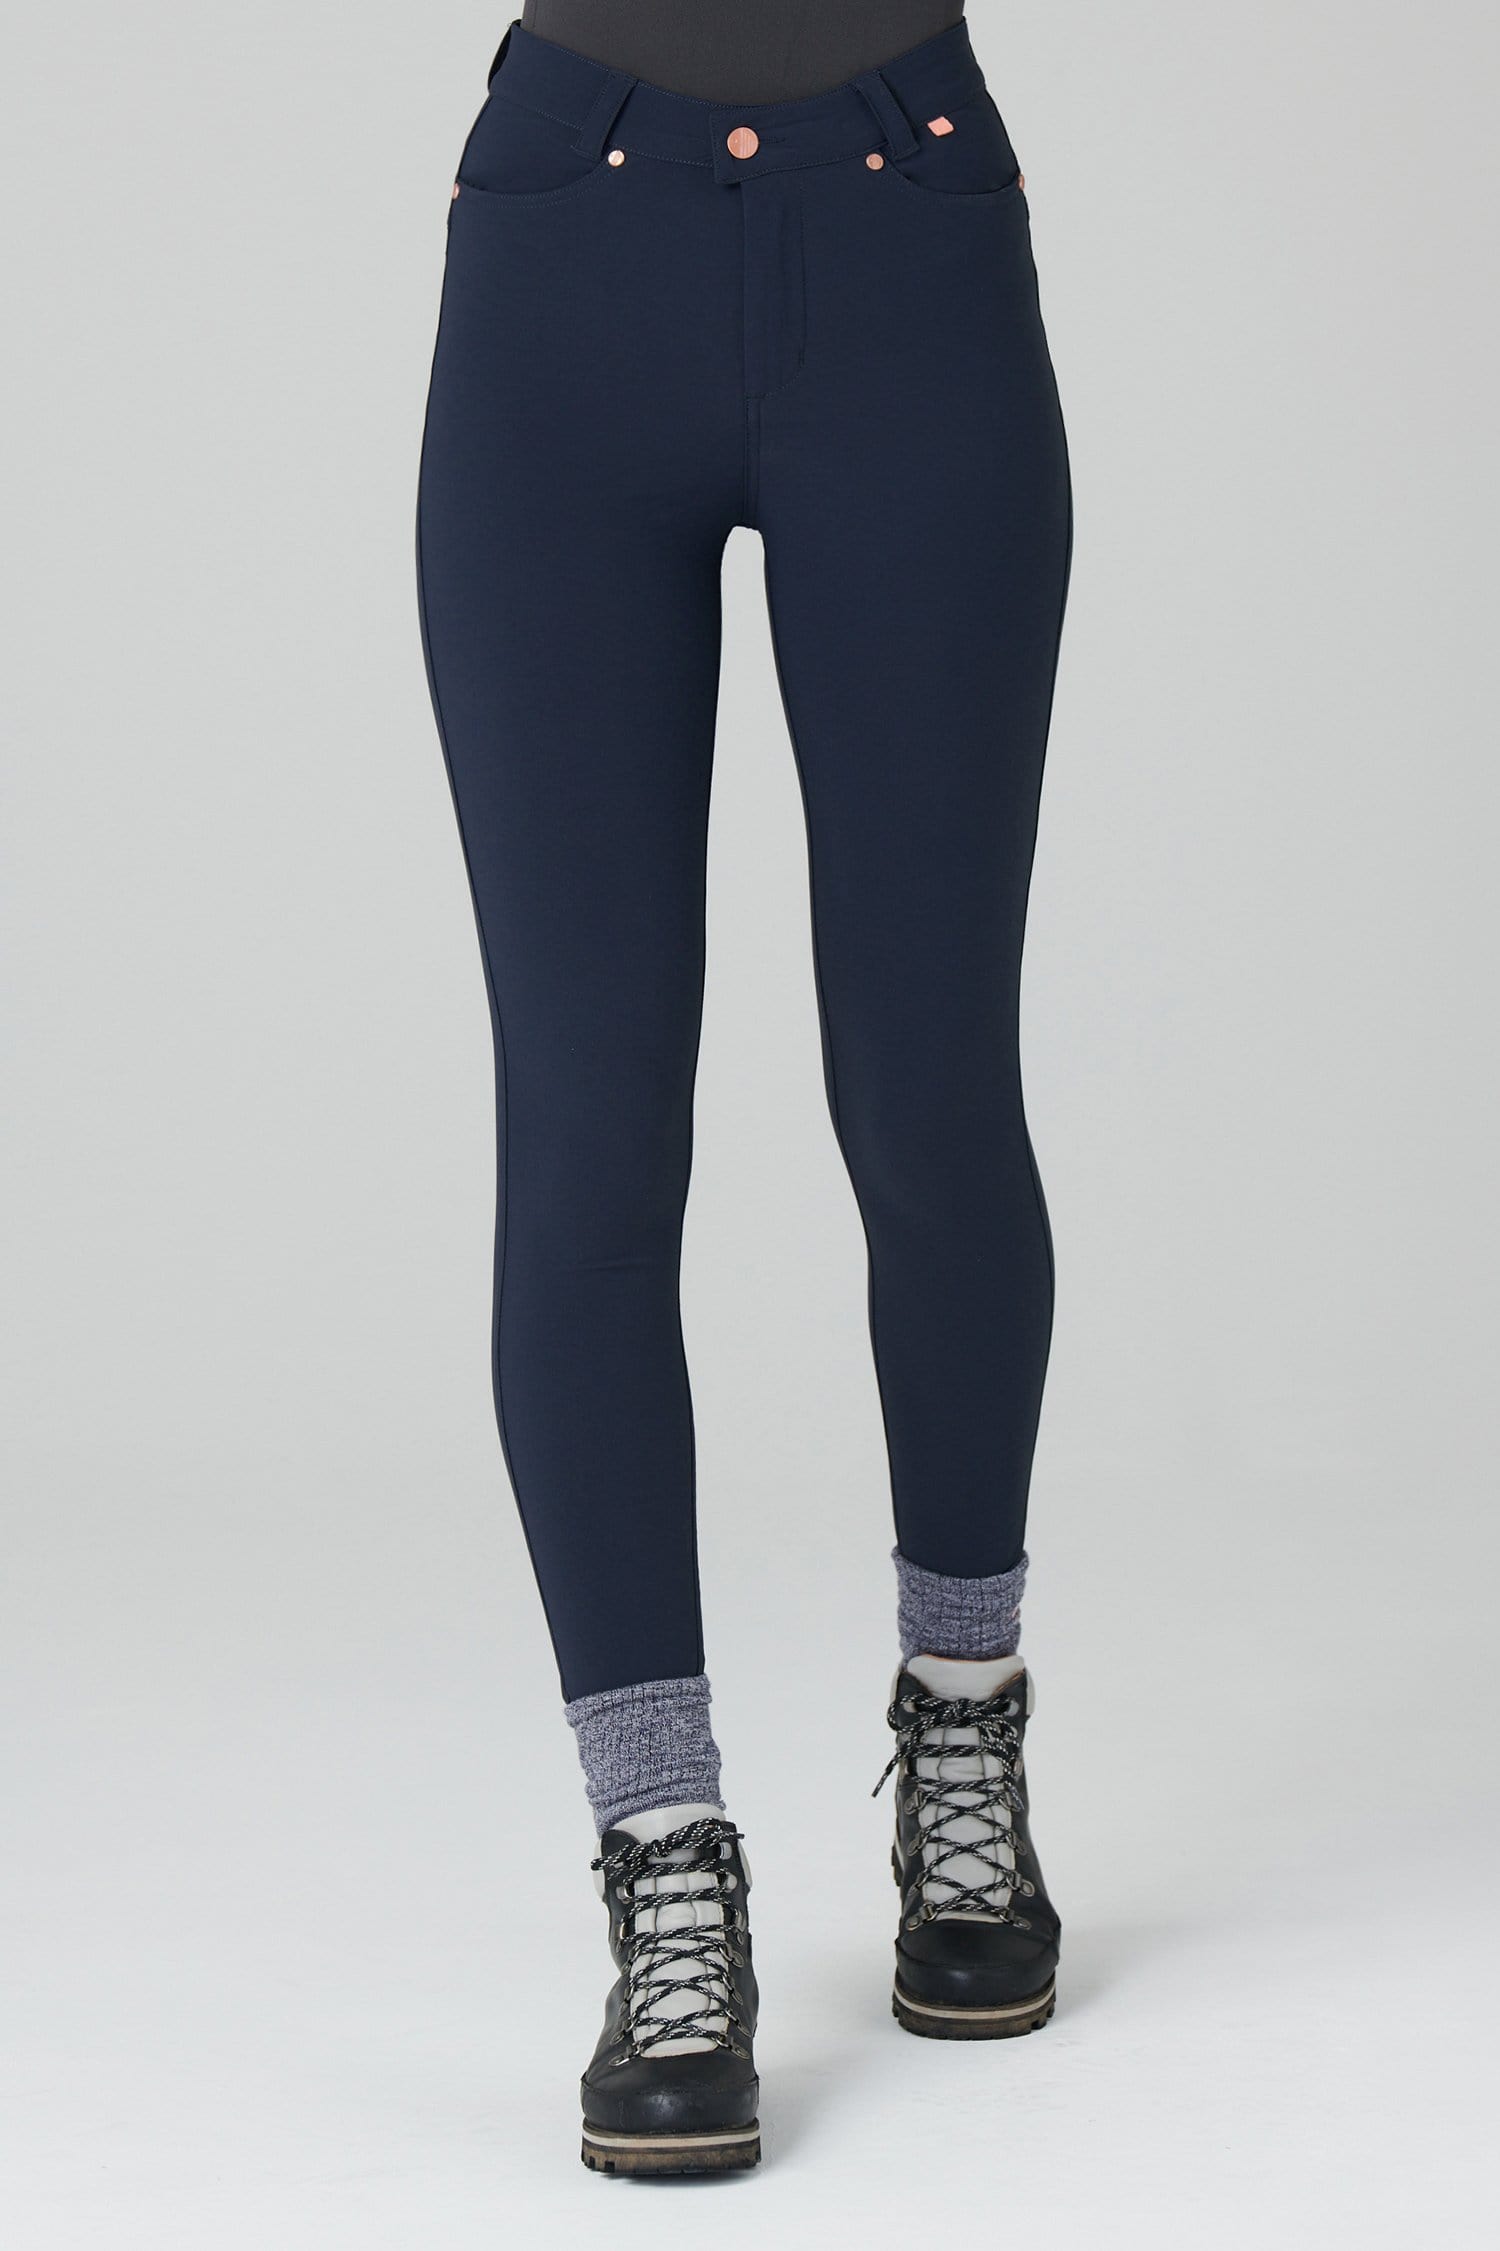 Thermal Skinny Outdoor Trousers - Deep Navy - 28xl / Uk10 - Womens - Acai Outdoorwear